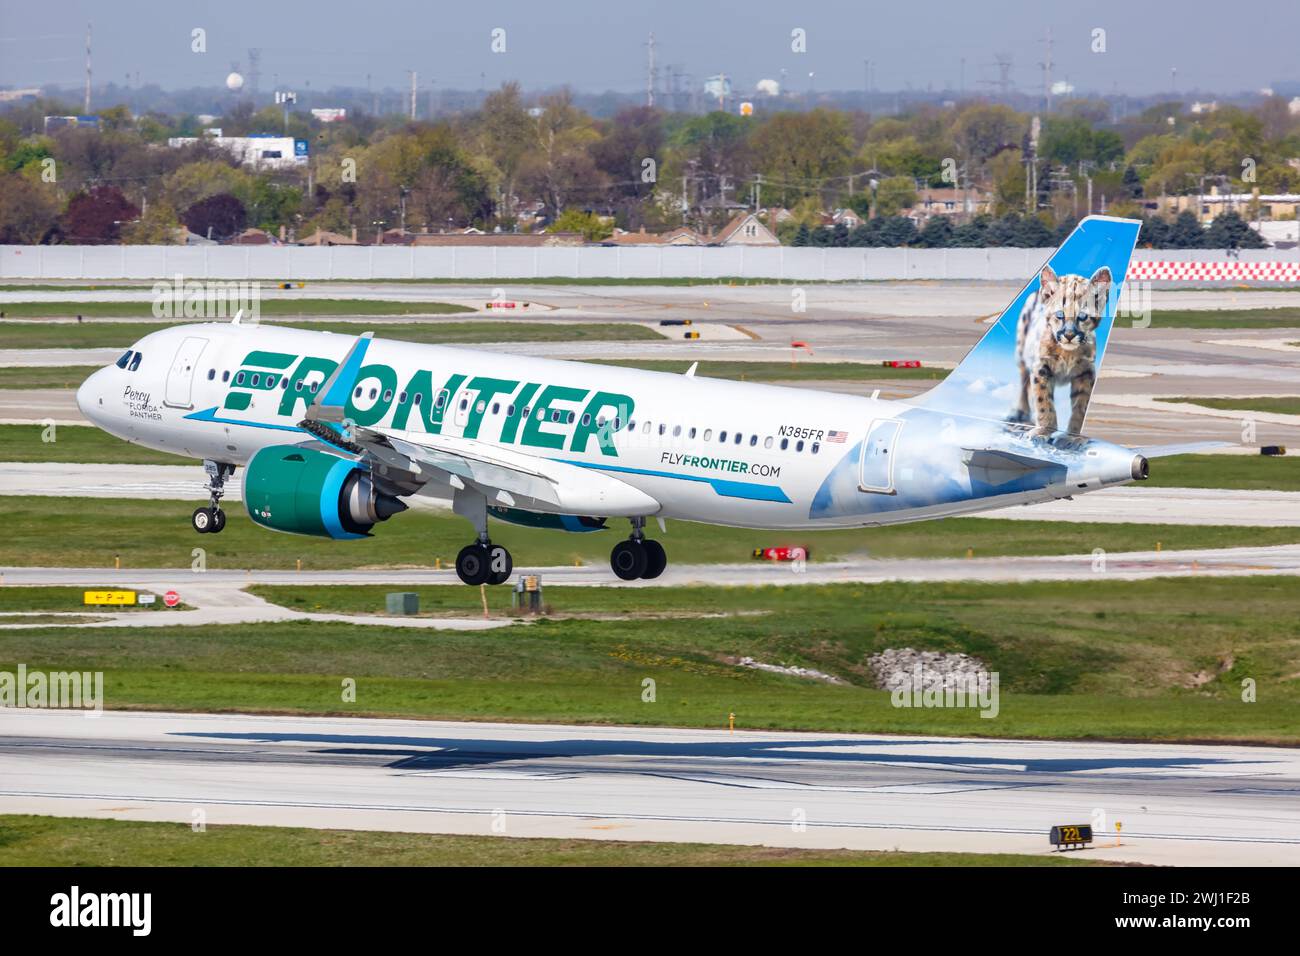 Frontier Airlines Airbus A320neo aircraft Chicago Midway Airport in the USA Stock Photo